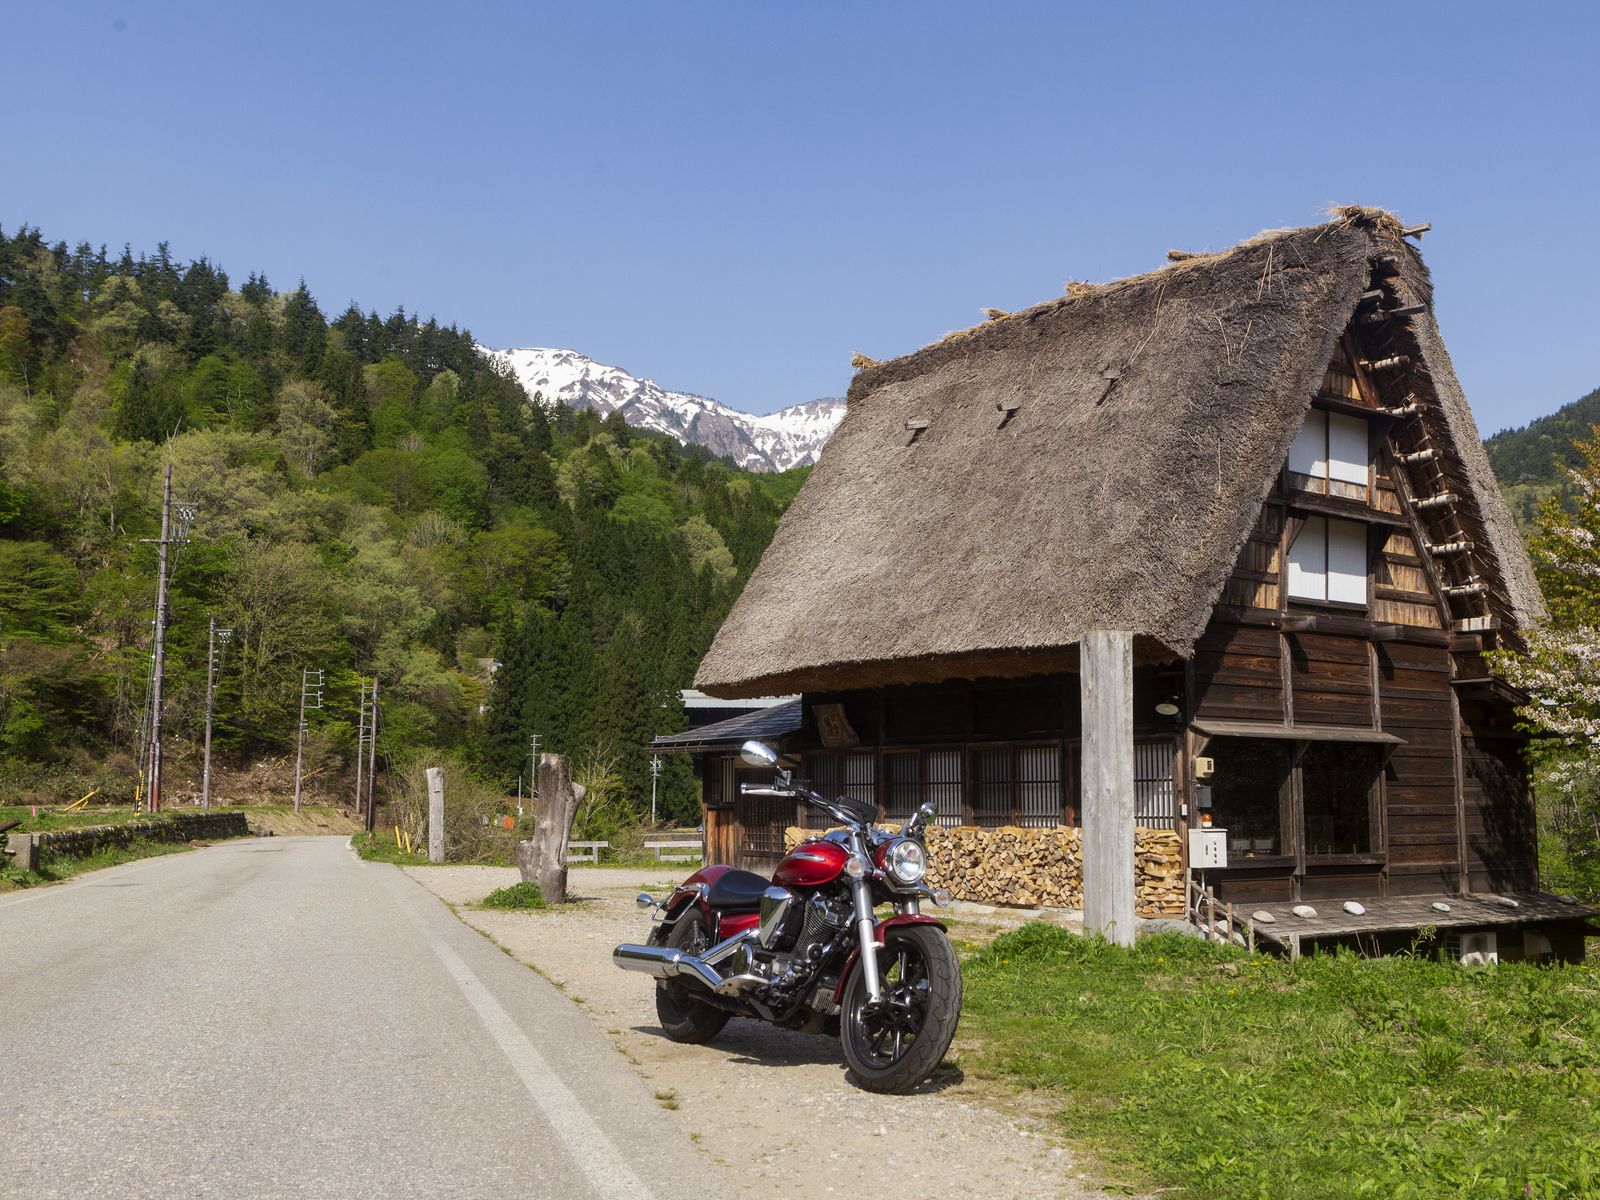 1600x1200 Wallpaper motorcycle, red, house, trees, mountain